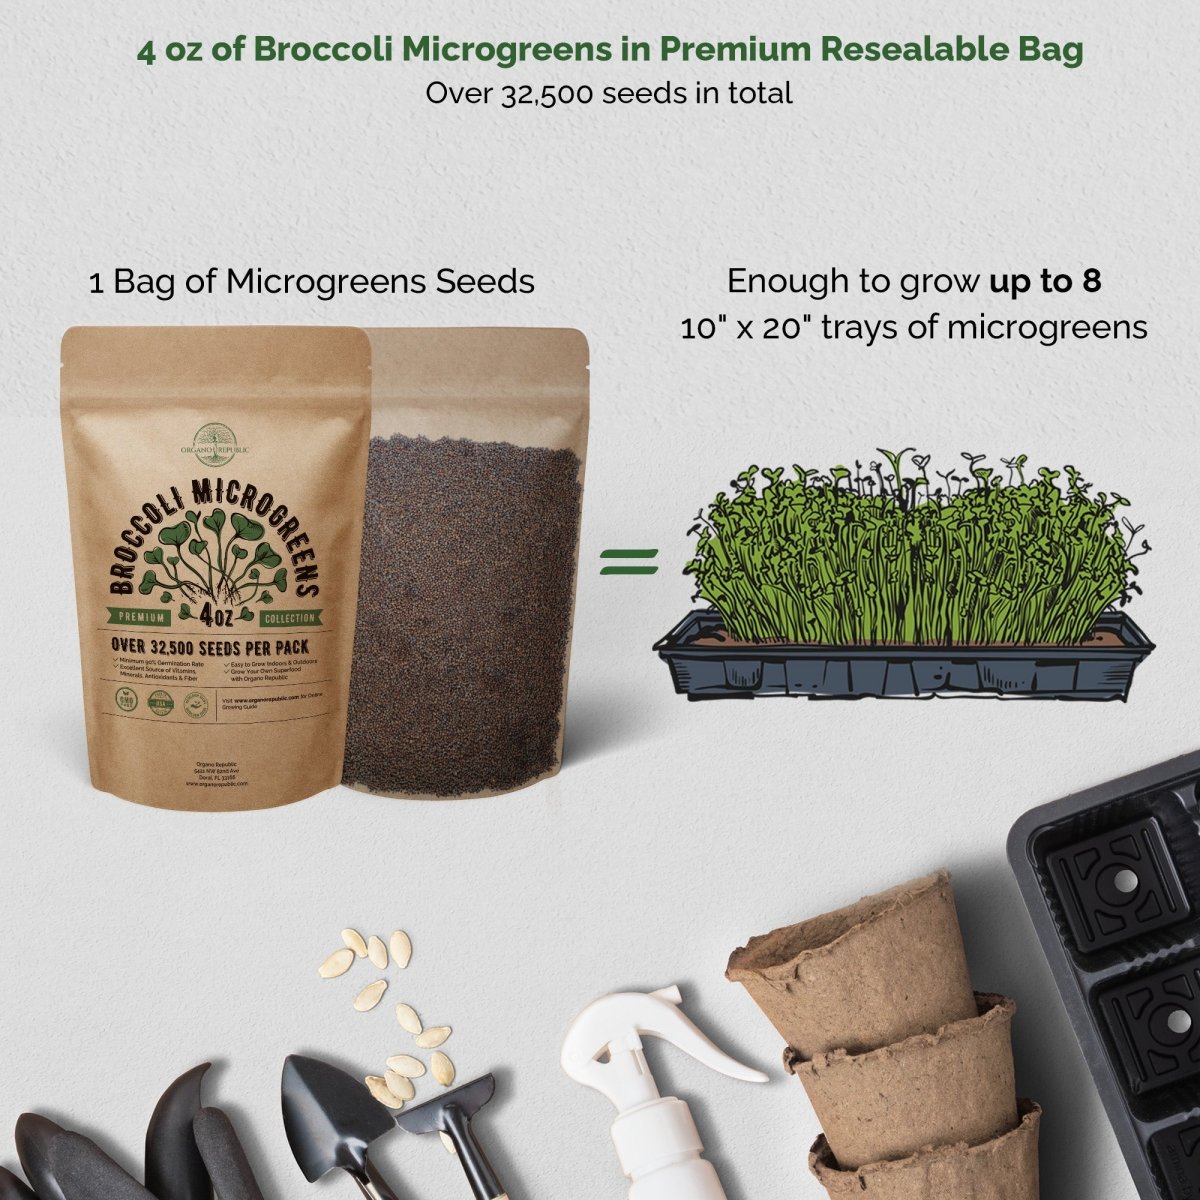 Broccoli Sprouting & Microgreens Seeds 4oz - Non-GMO, Heirloom Sprout Seeds Kit - Organo Republic